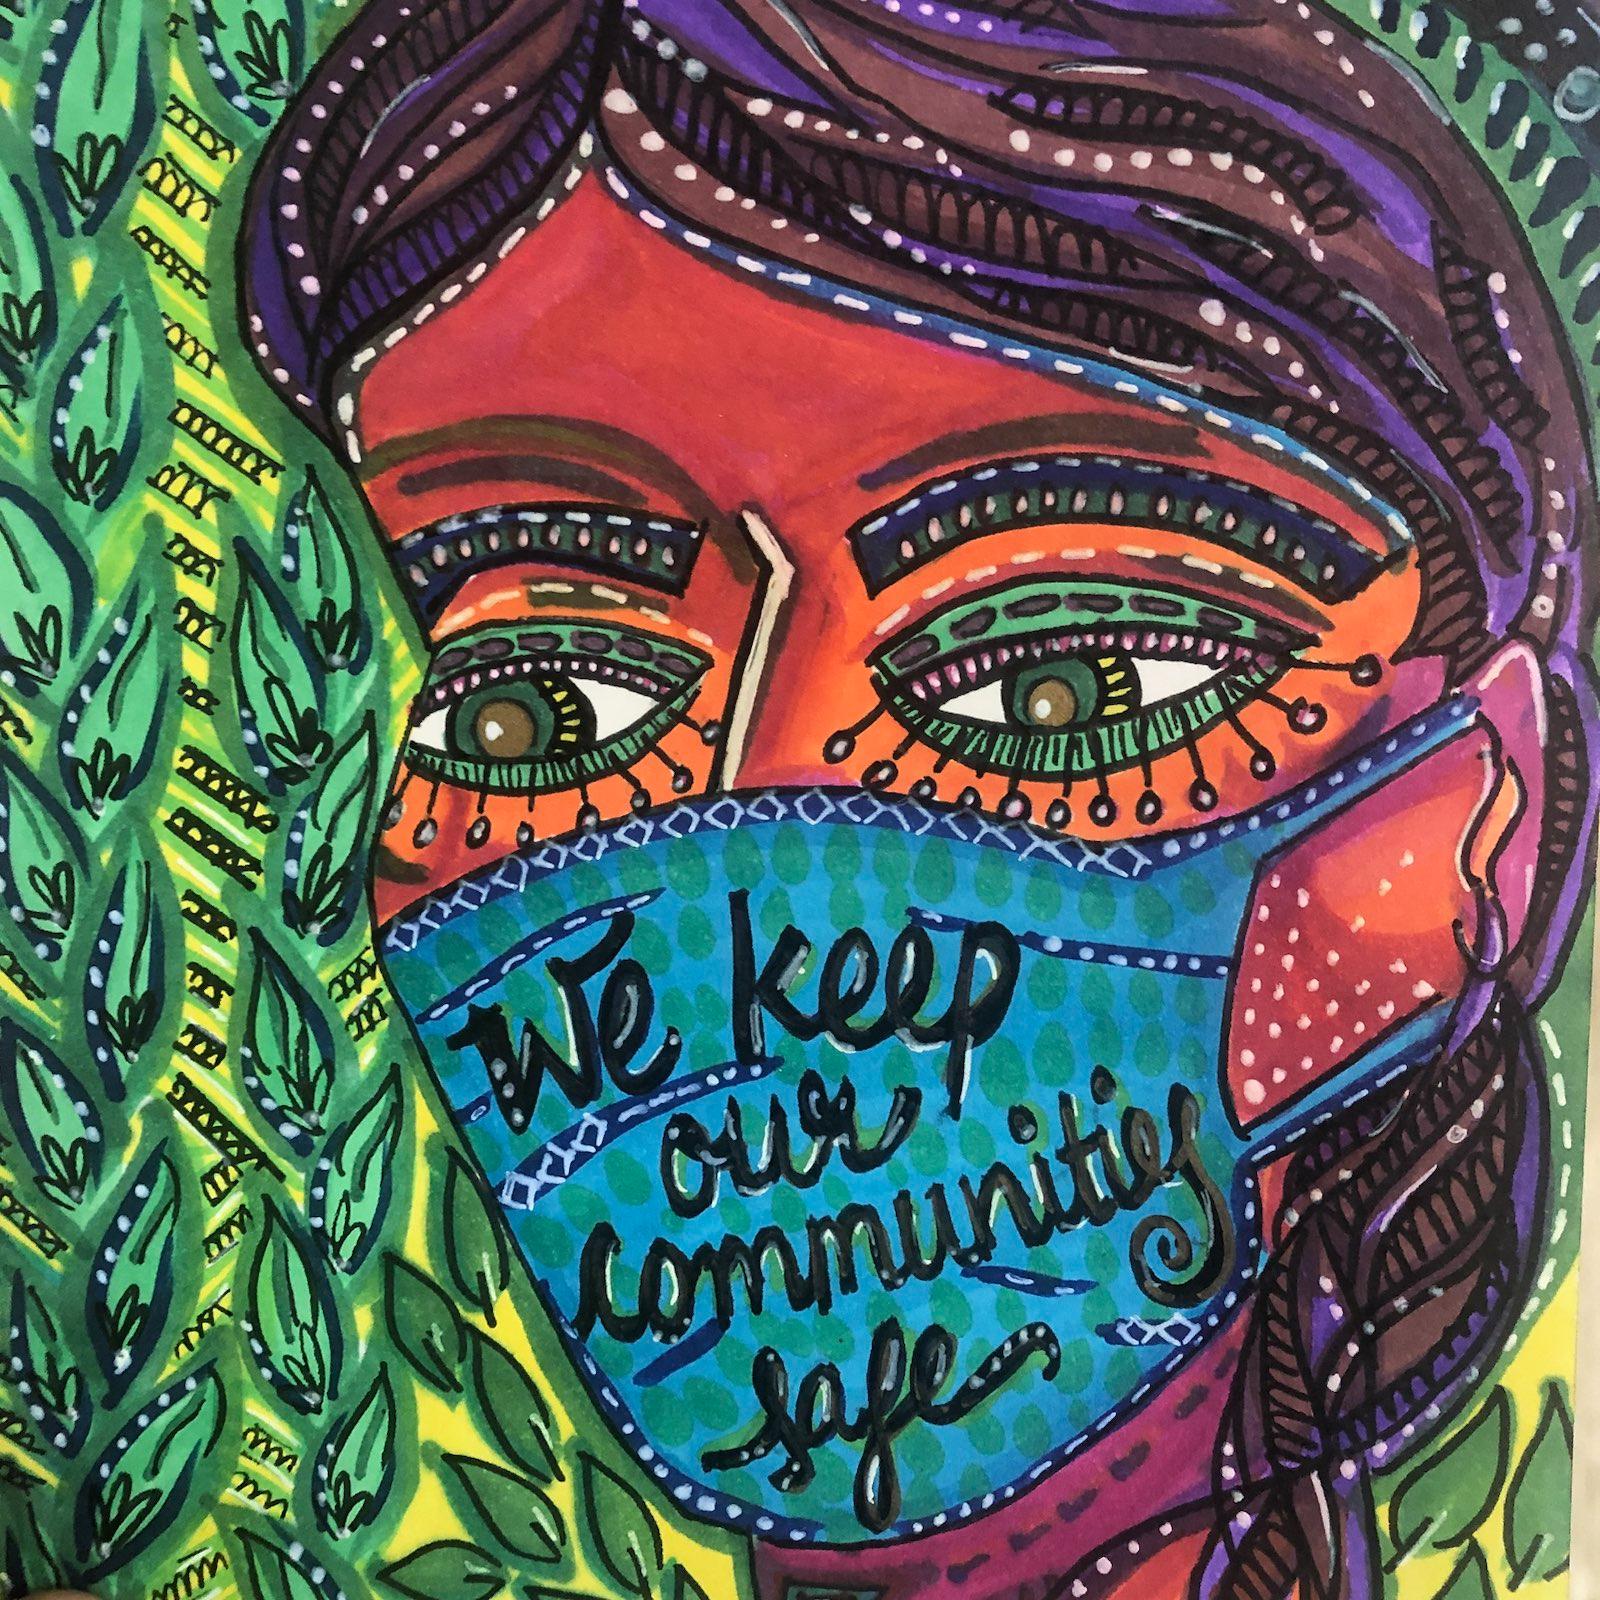 art by avanti. a brown person with dark hair wears a mask that says "we keep our community safe". background is green leaves.